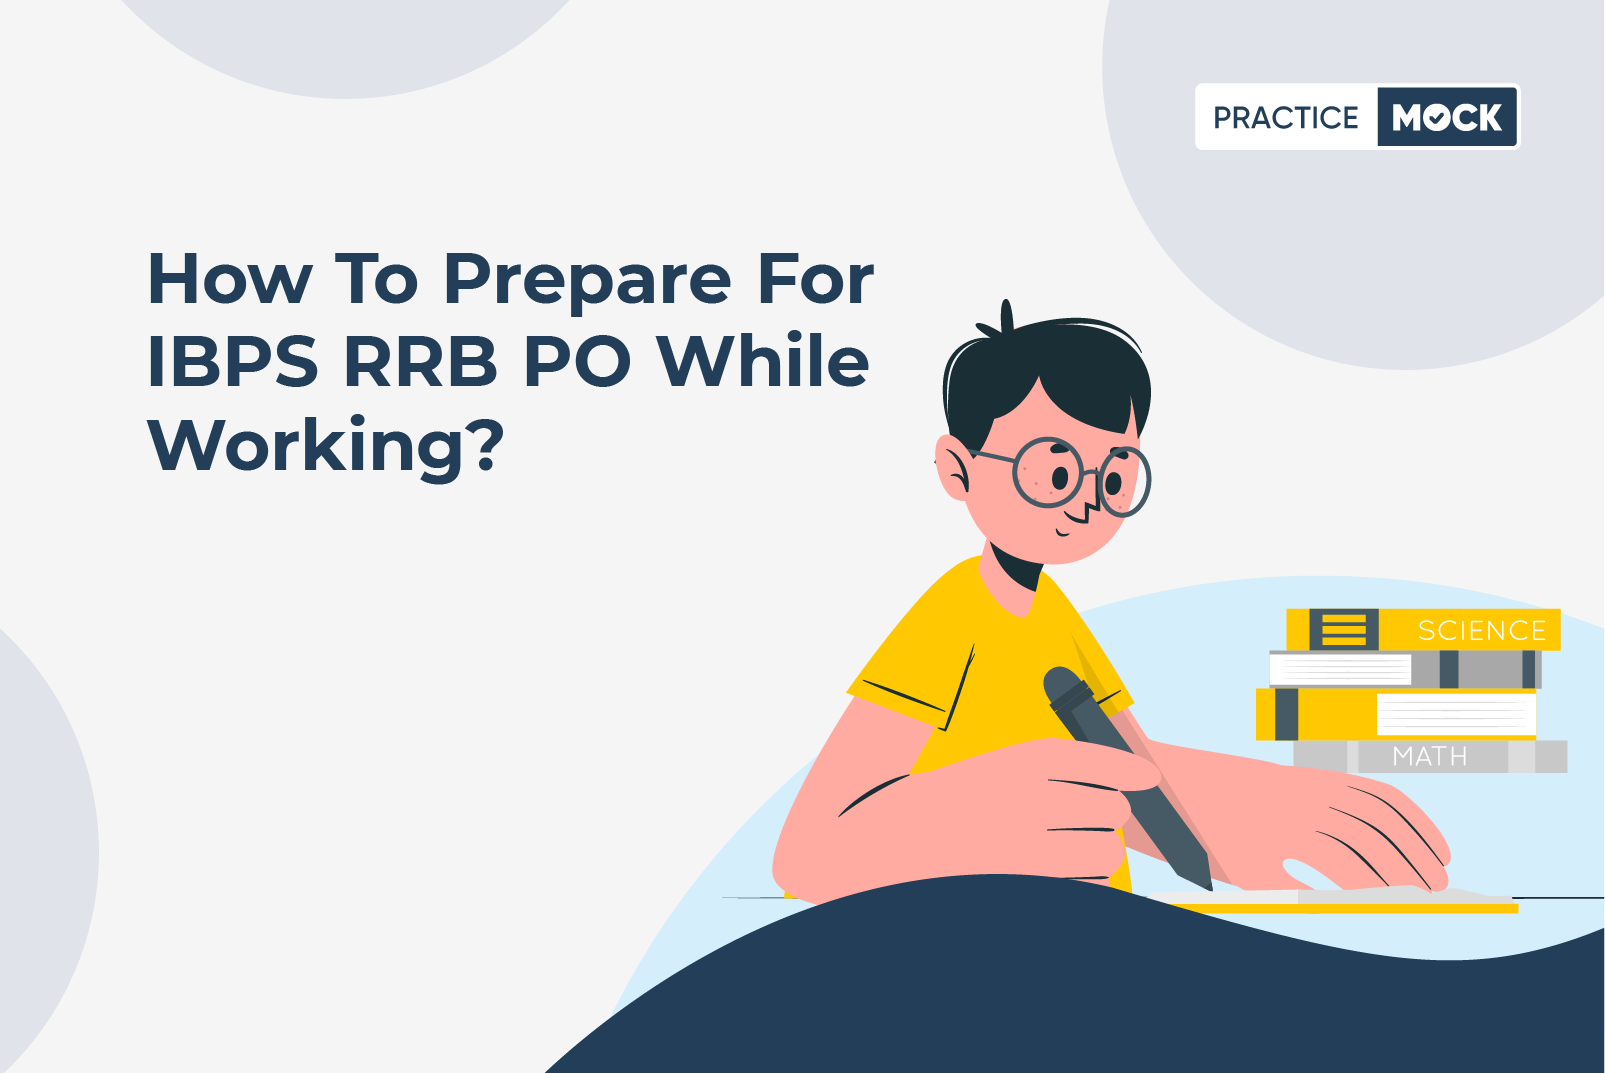 How to Prepare for IBPS RRB PO while working?